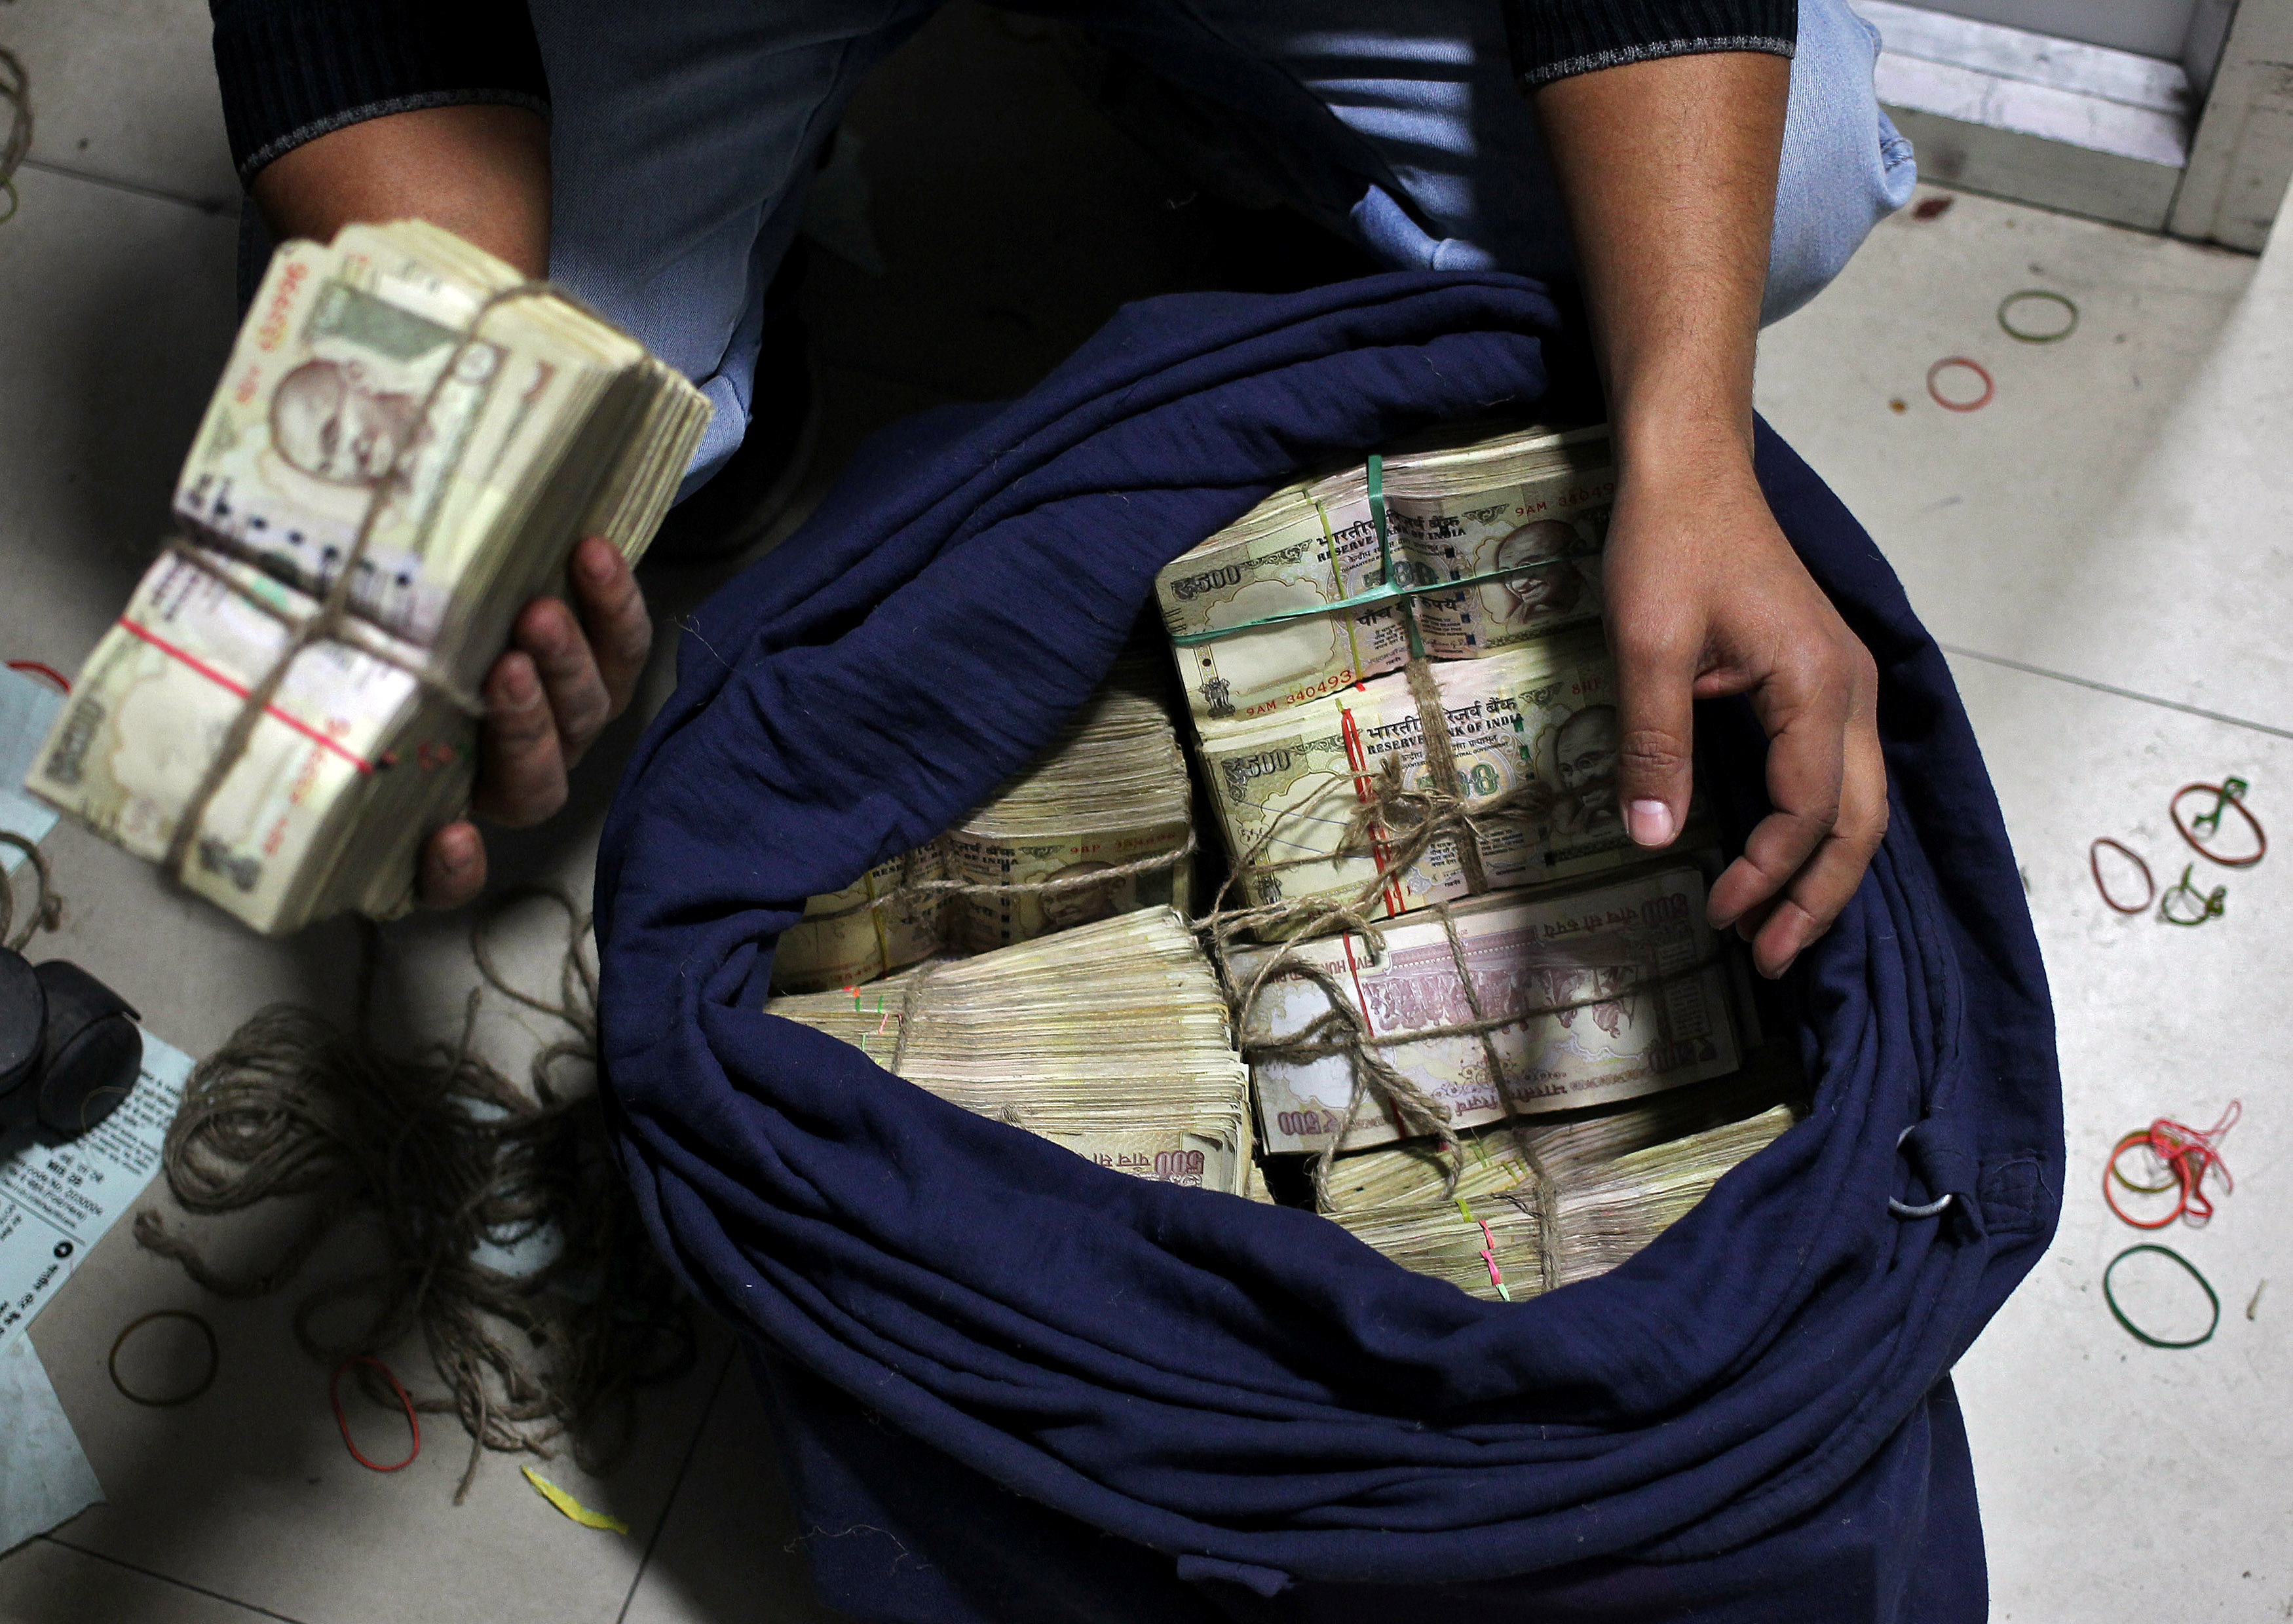 A bank employee takes out a bundle of old 500 Indian rupee banknotes from a sack to count them inside a bank in Jammu